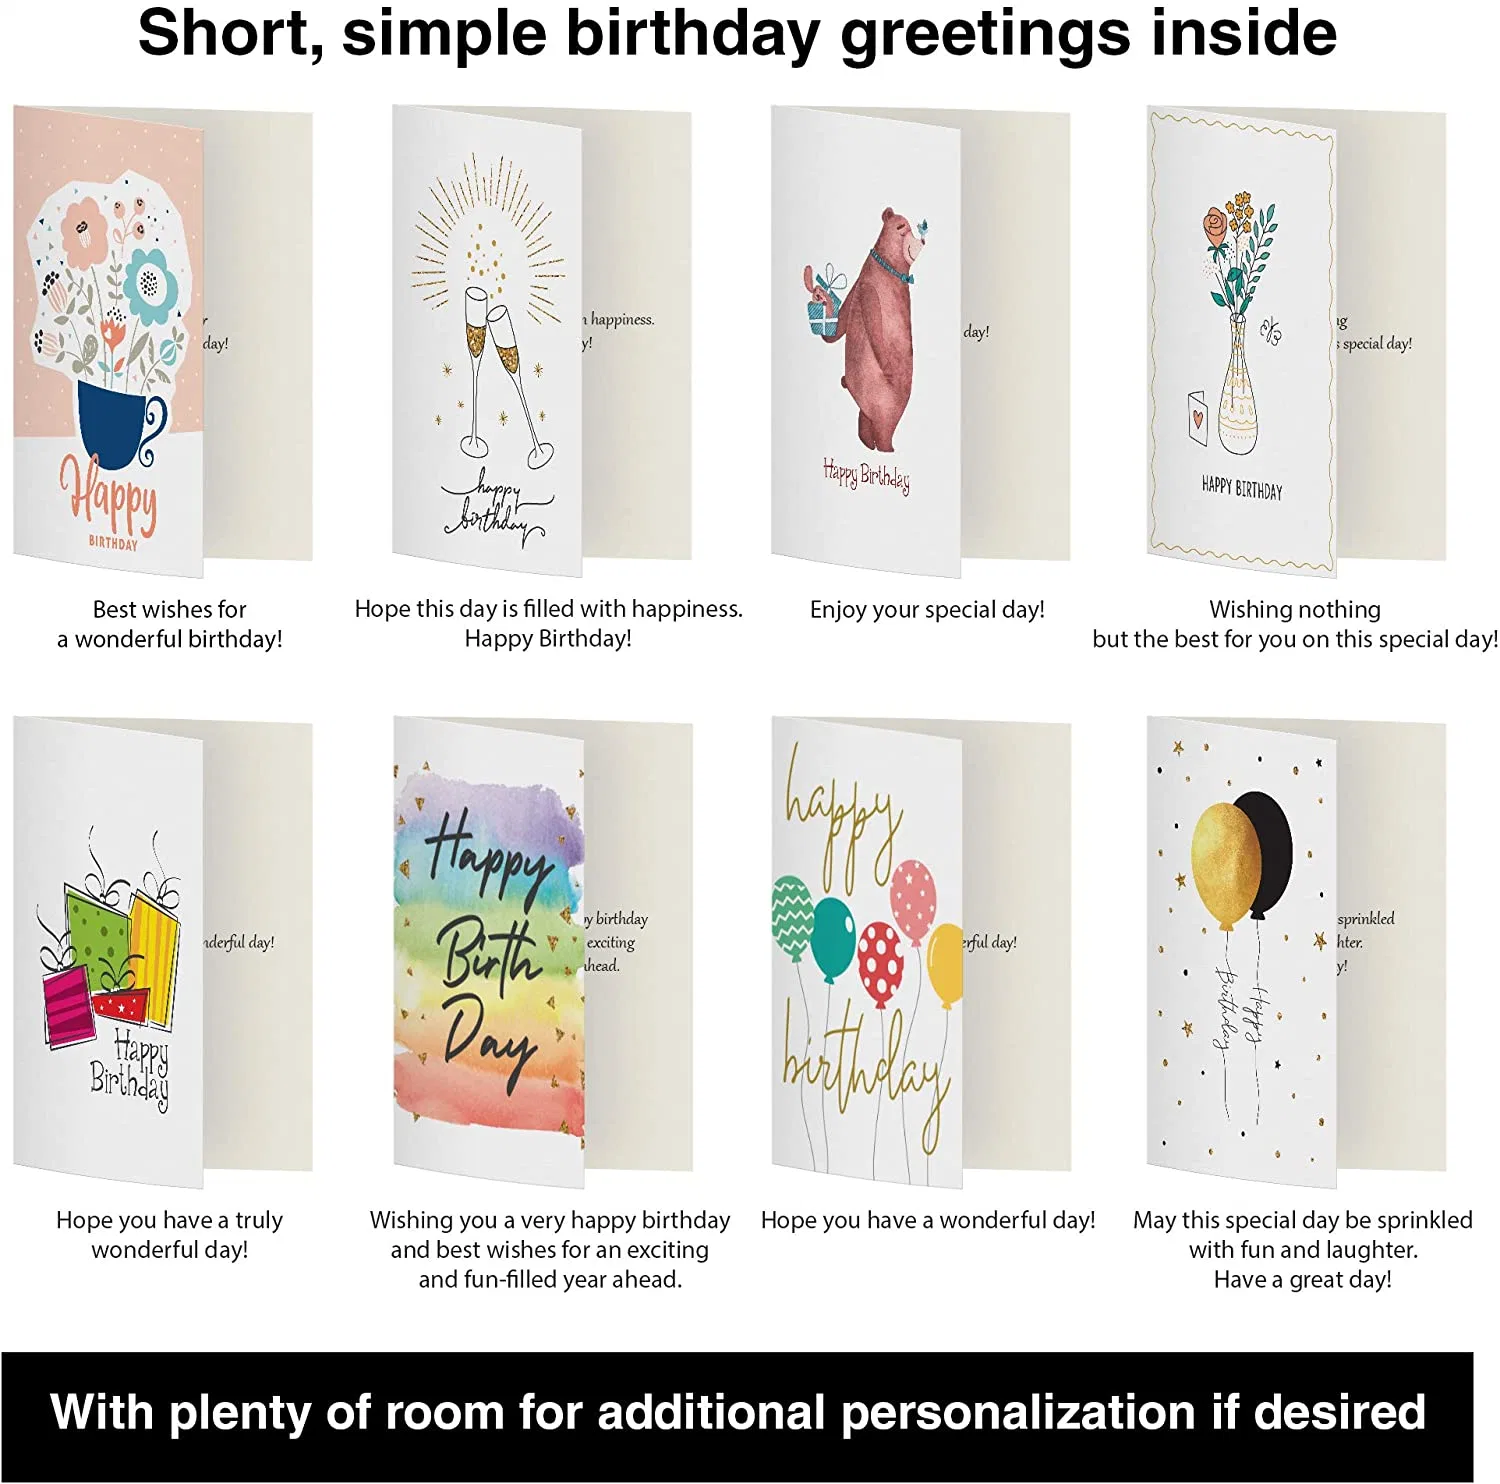 Custom Happy Birthday Thank You Cards Wholesale/Supplier Invitation Cards Wedding Greeting Card Paper Customized Card